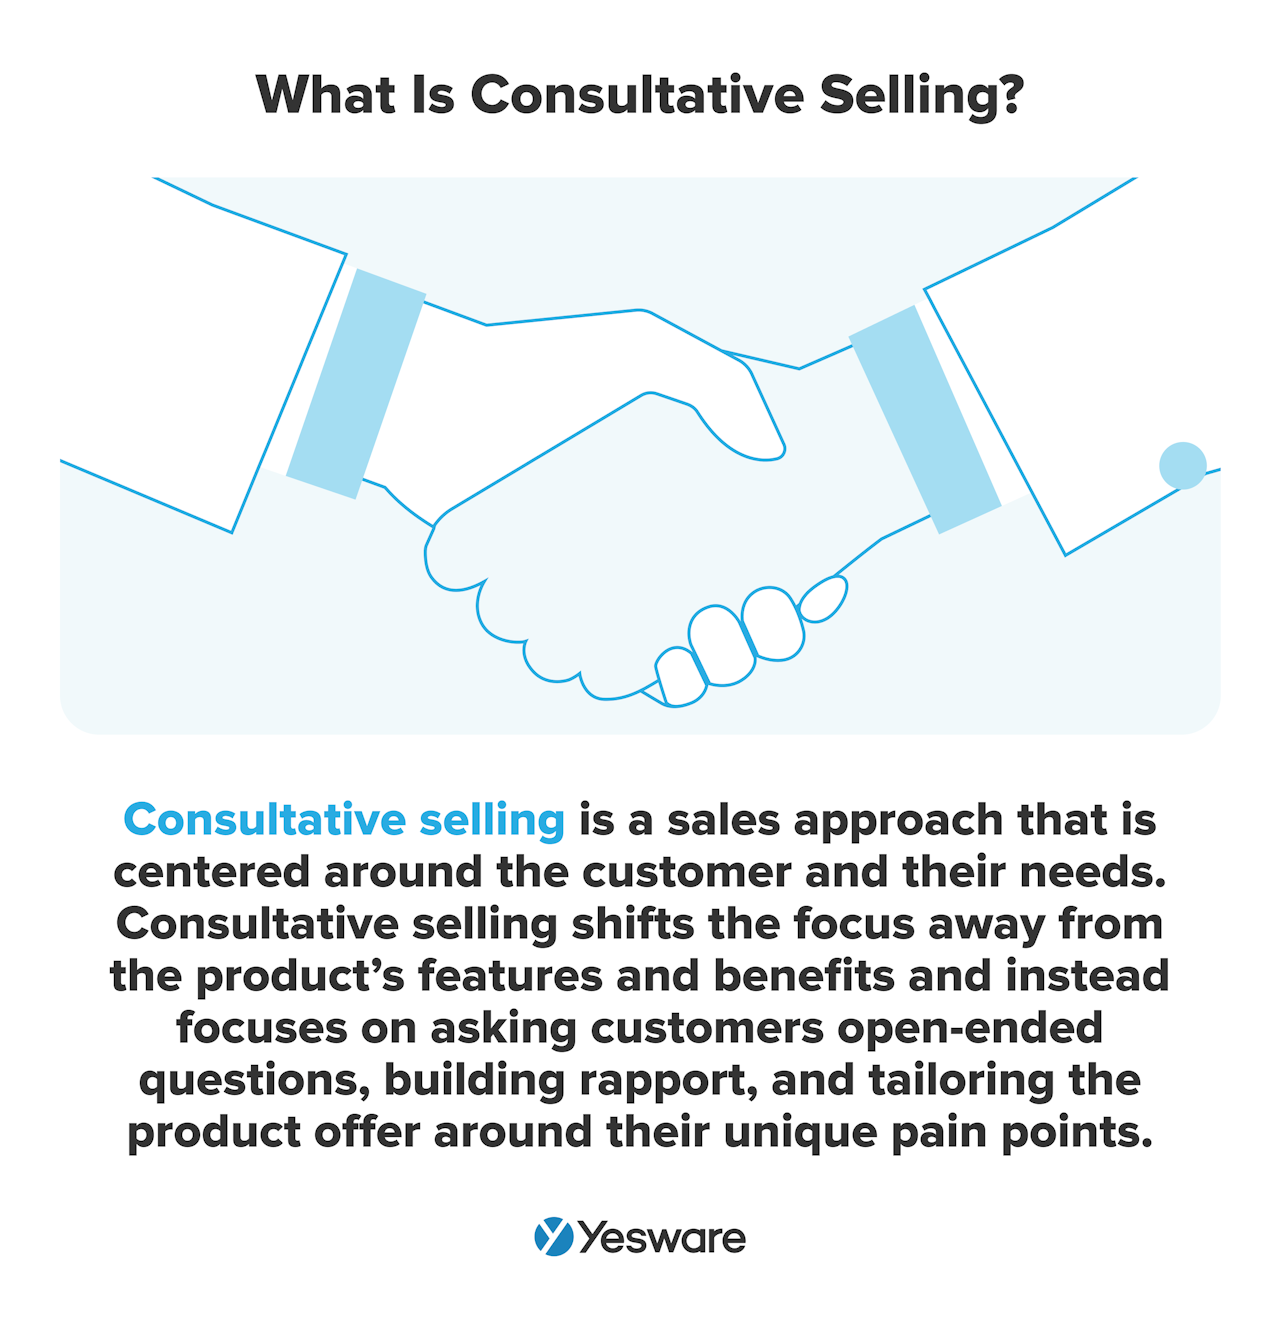 What is consultative selling?